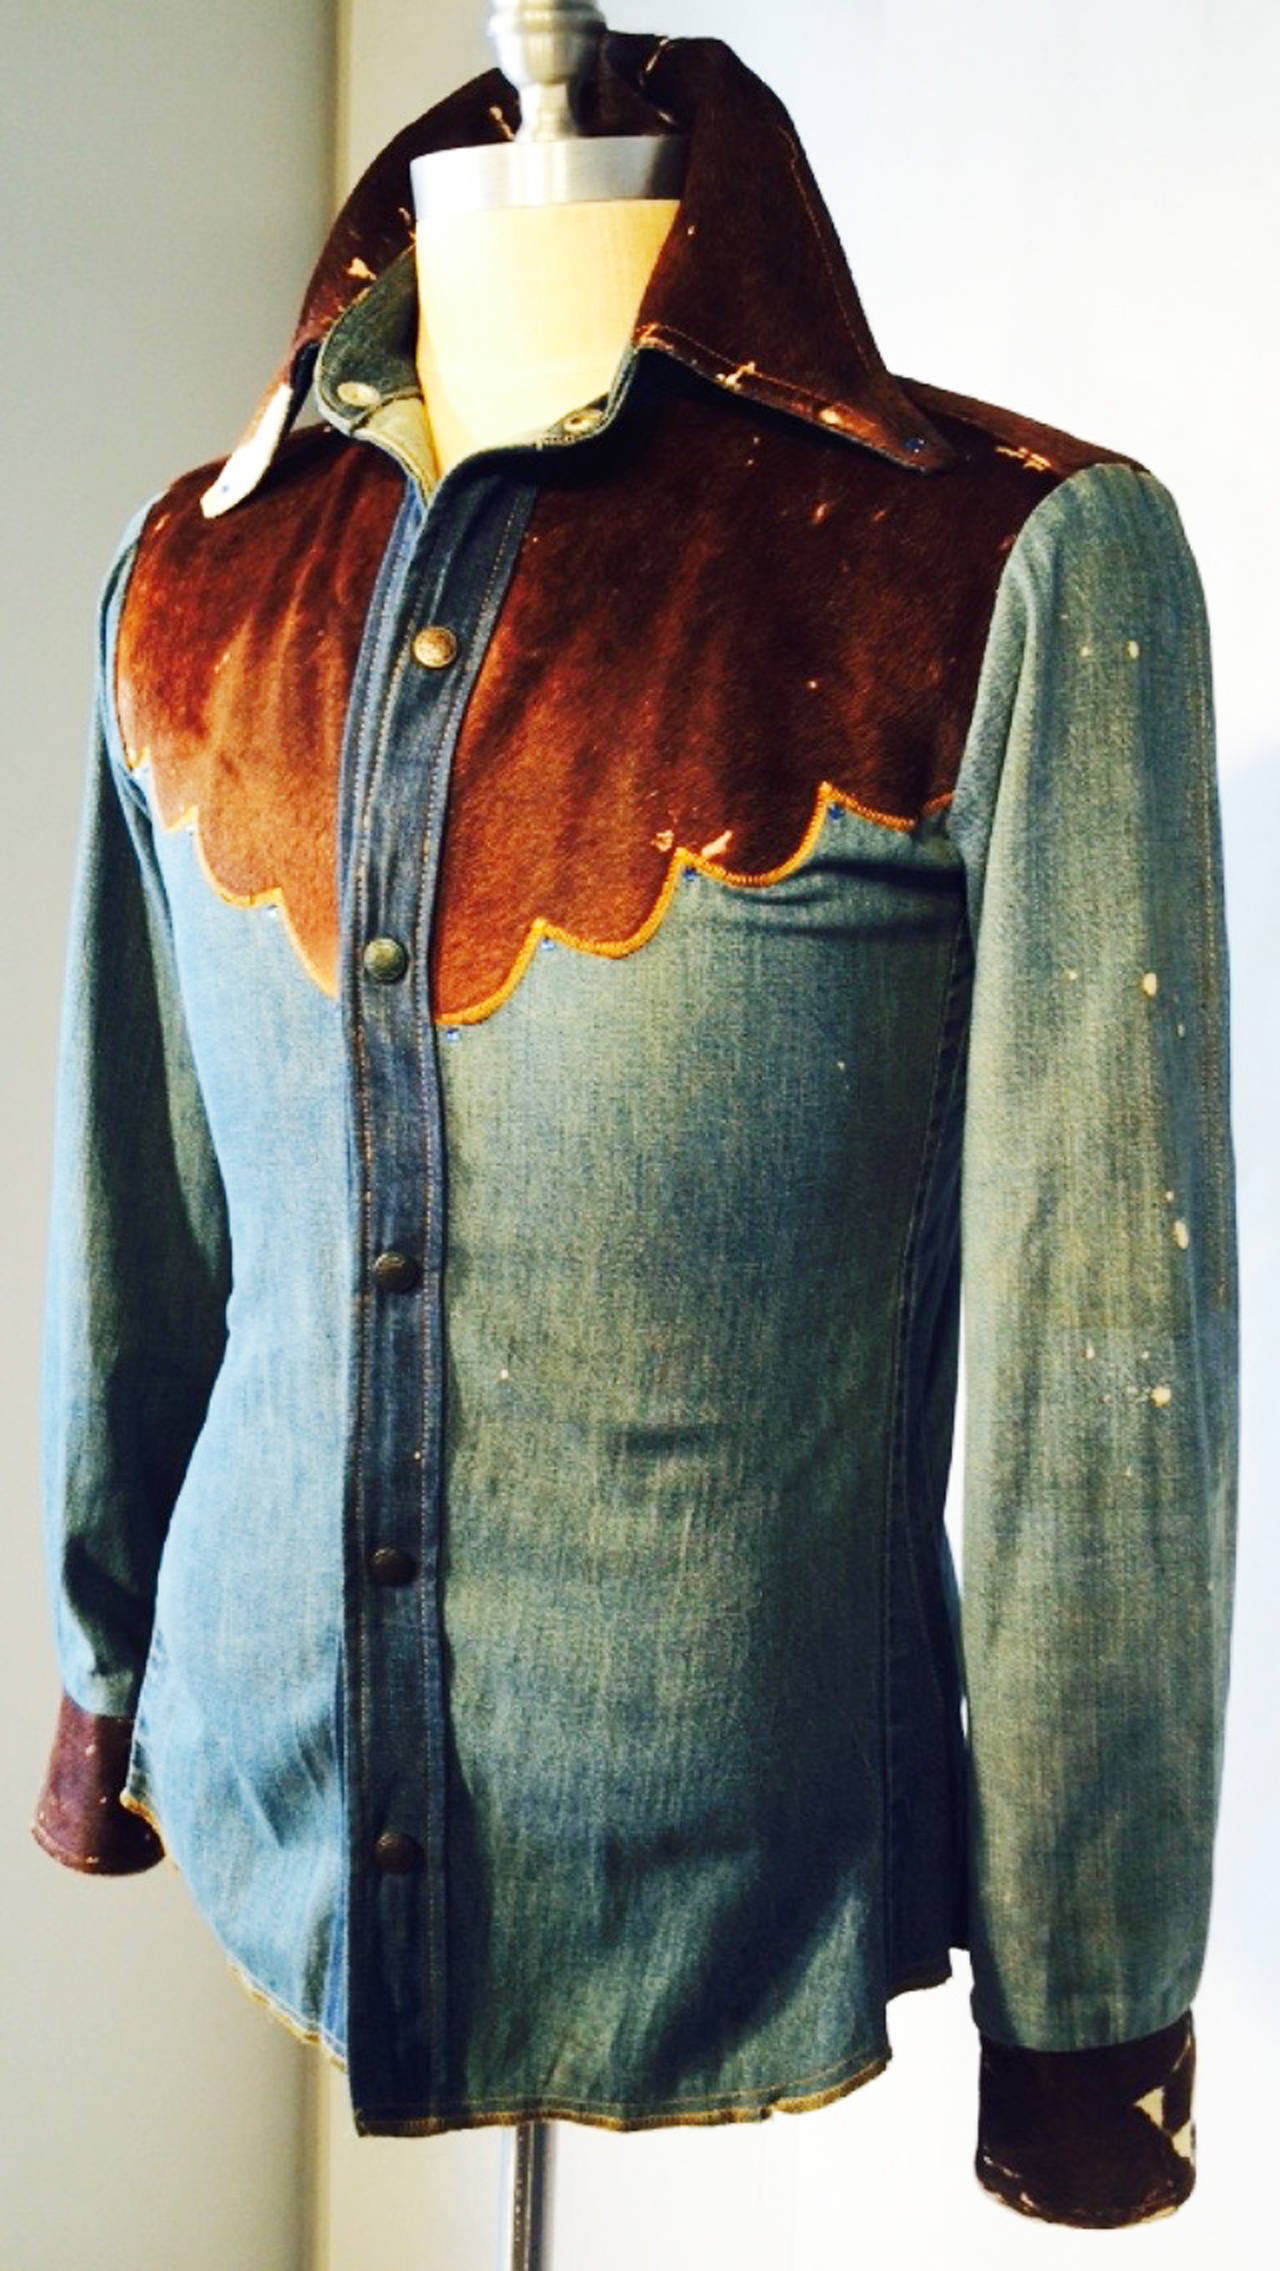 A fine and rare vintage gents Antonio Guiseppe embellished denim jacket/shirt. Authentic two-tone denim item trimmed in cowhide and crystals with metal snap front and cuff closures. A rare period rock and roll musician costume/stage item. Excellent.